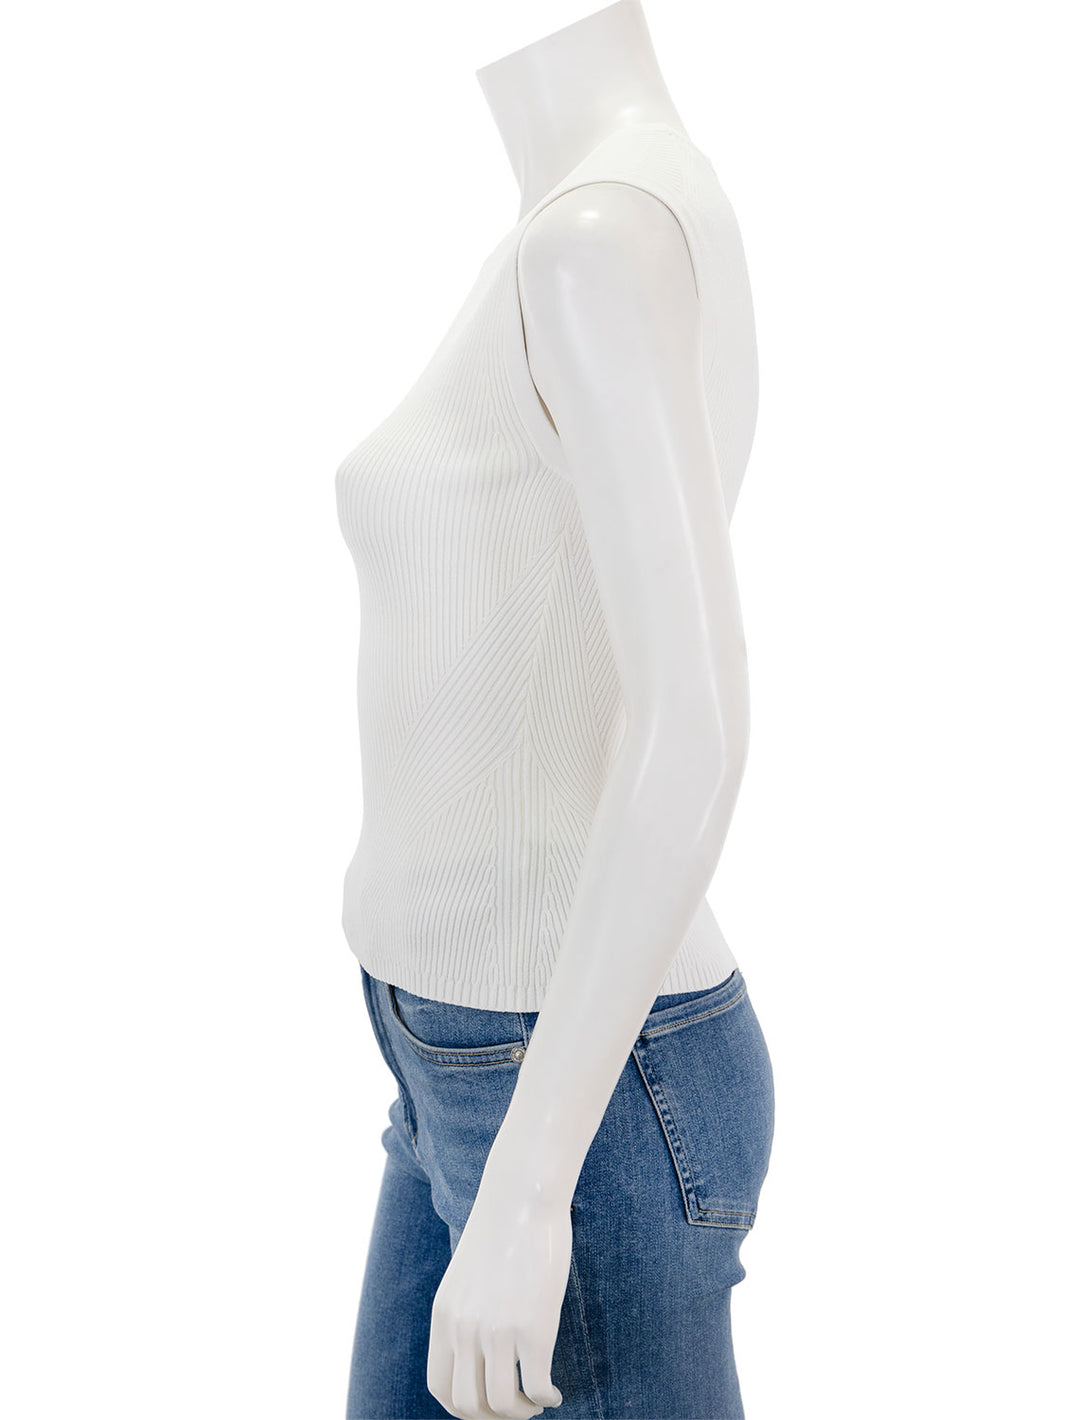 Side view of Veronica Beard's sid sleeveless pullover in off-white.